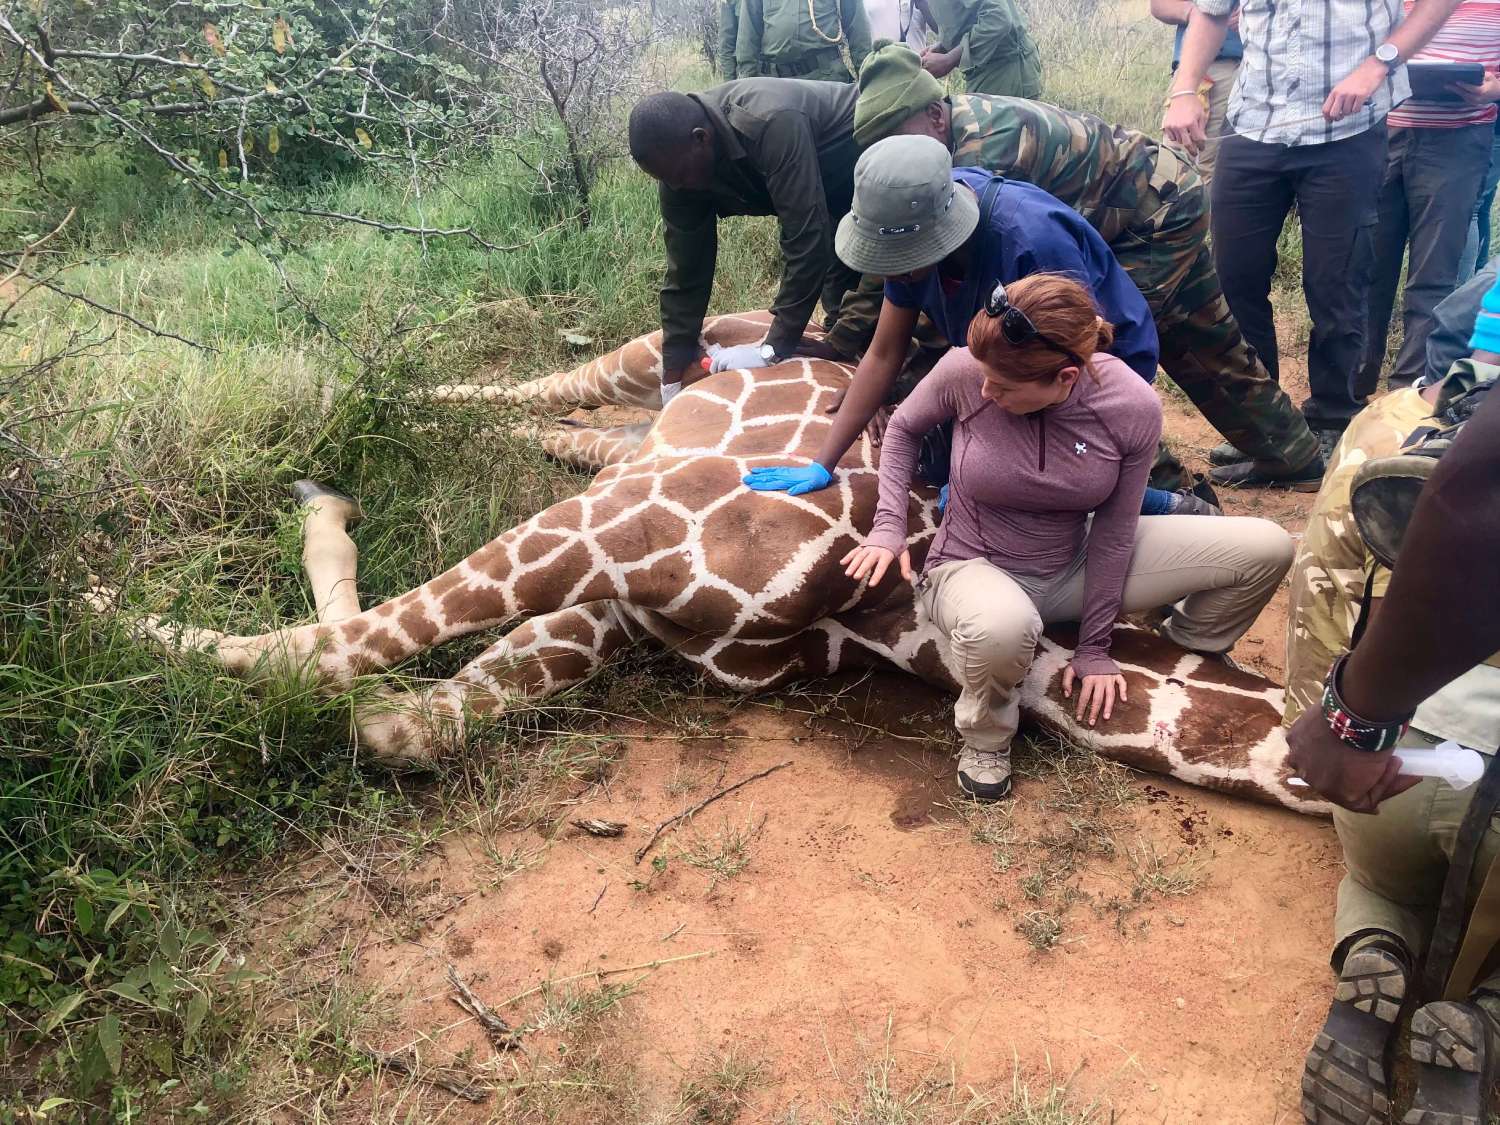 A giraffe is being examined by people in the background.